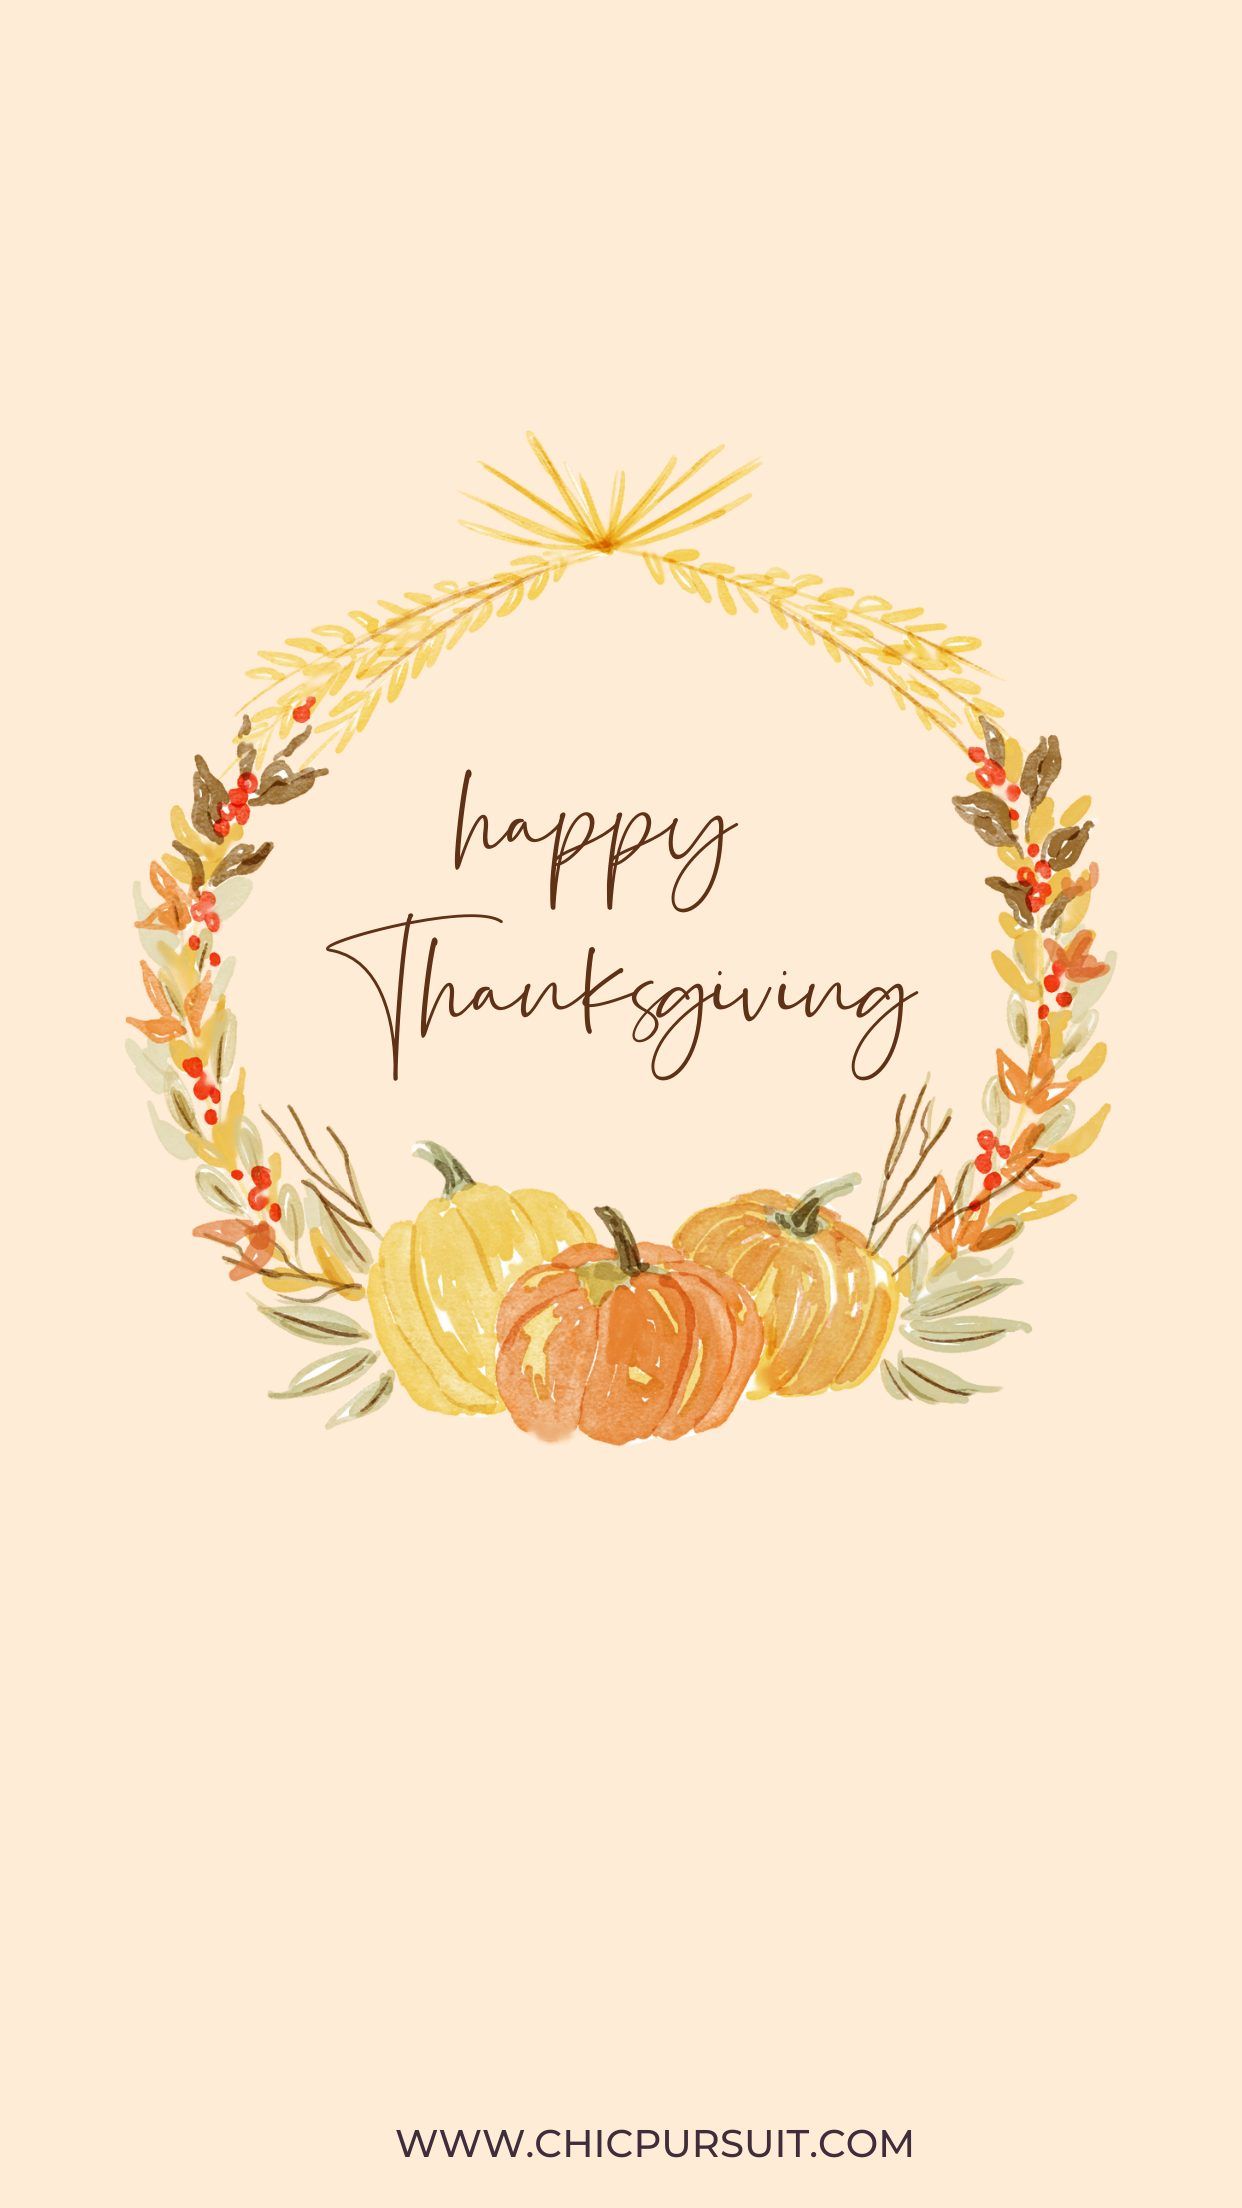 Cute Thanksgiving Wallpaper For iPhone (Free Download). Thanksgiving wallpaper, Happy thanksgiving wallpaper, Cute fall wallpaper